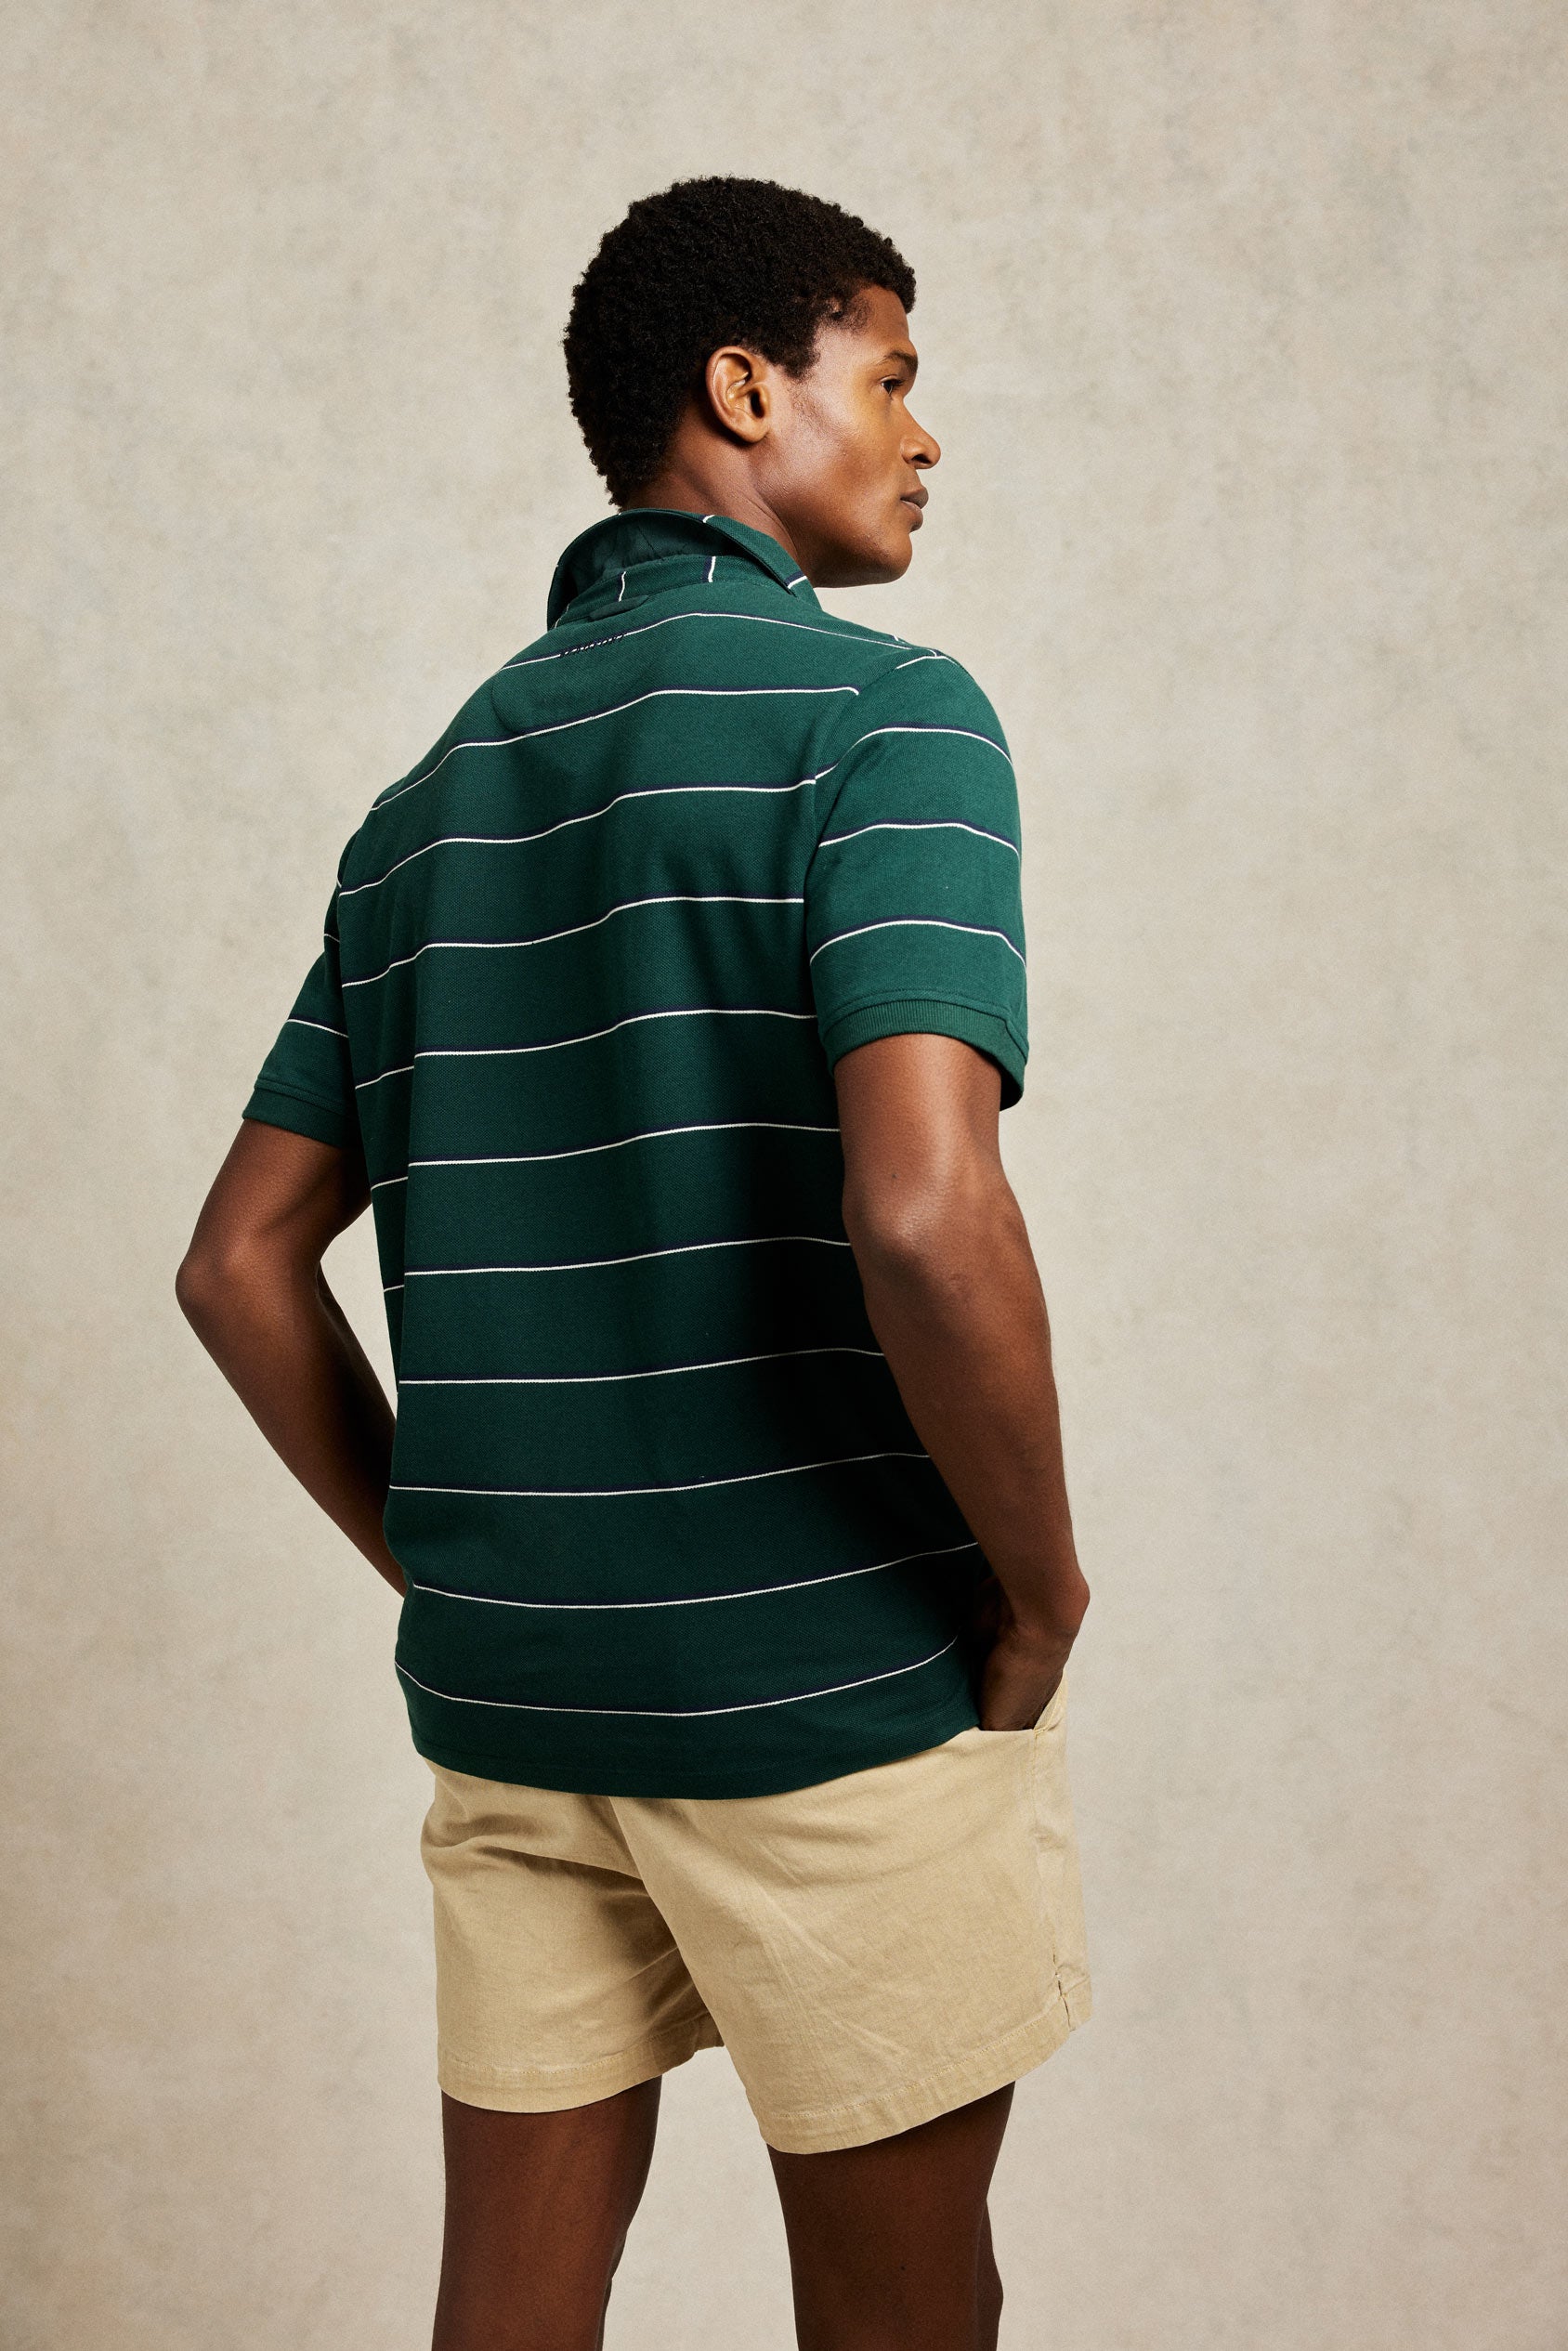 Emerald green stripe pique men’s polo shirt washed for a soft touch. 100% Cotton. Cut from pique cotton to a classic fit and patterned with stripes. Casual wear. Machine wash. Size S, M, L, XL, XXL.